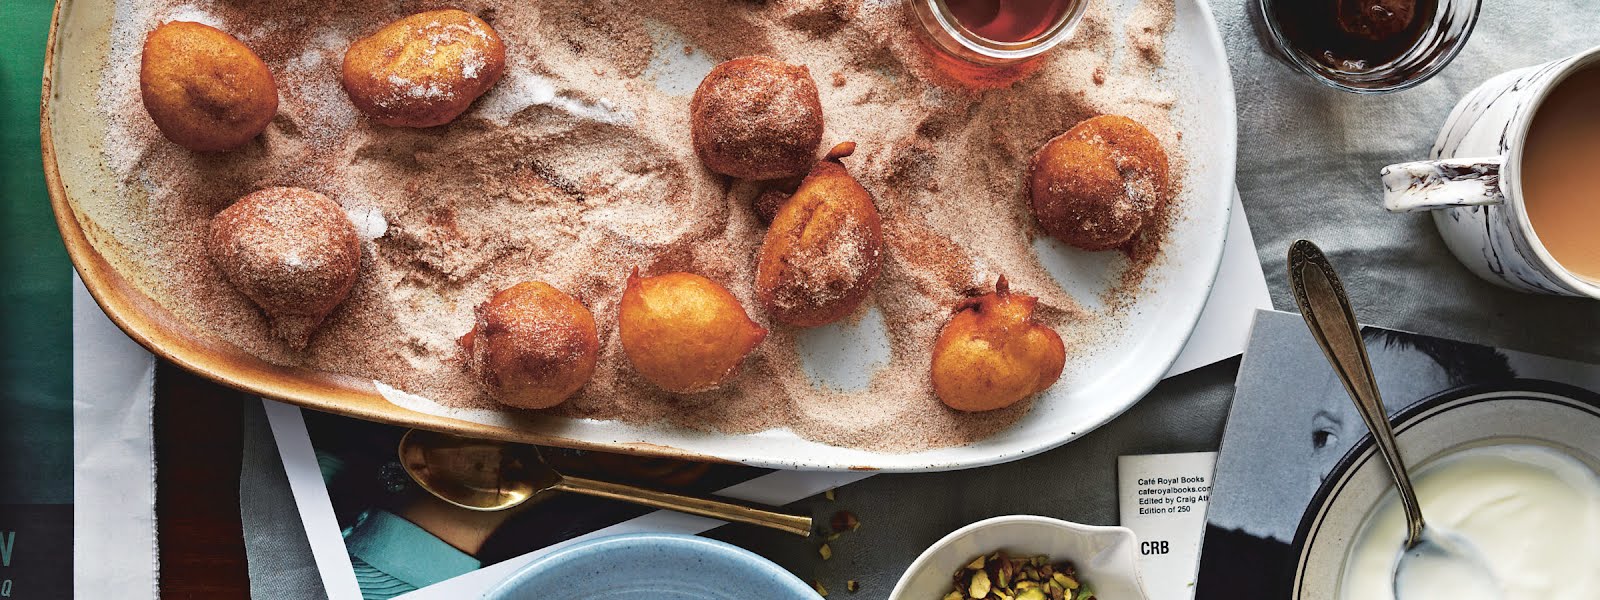 What to bake this weekend: Mini ricotta doughnuts with pistachio and honey topping